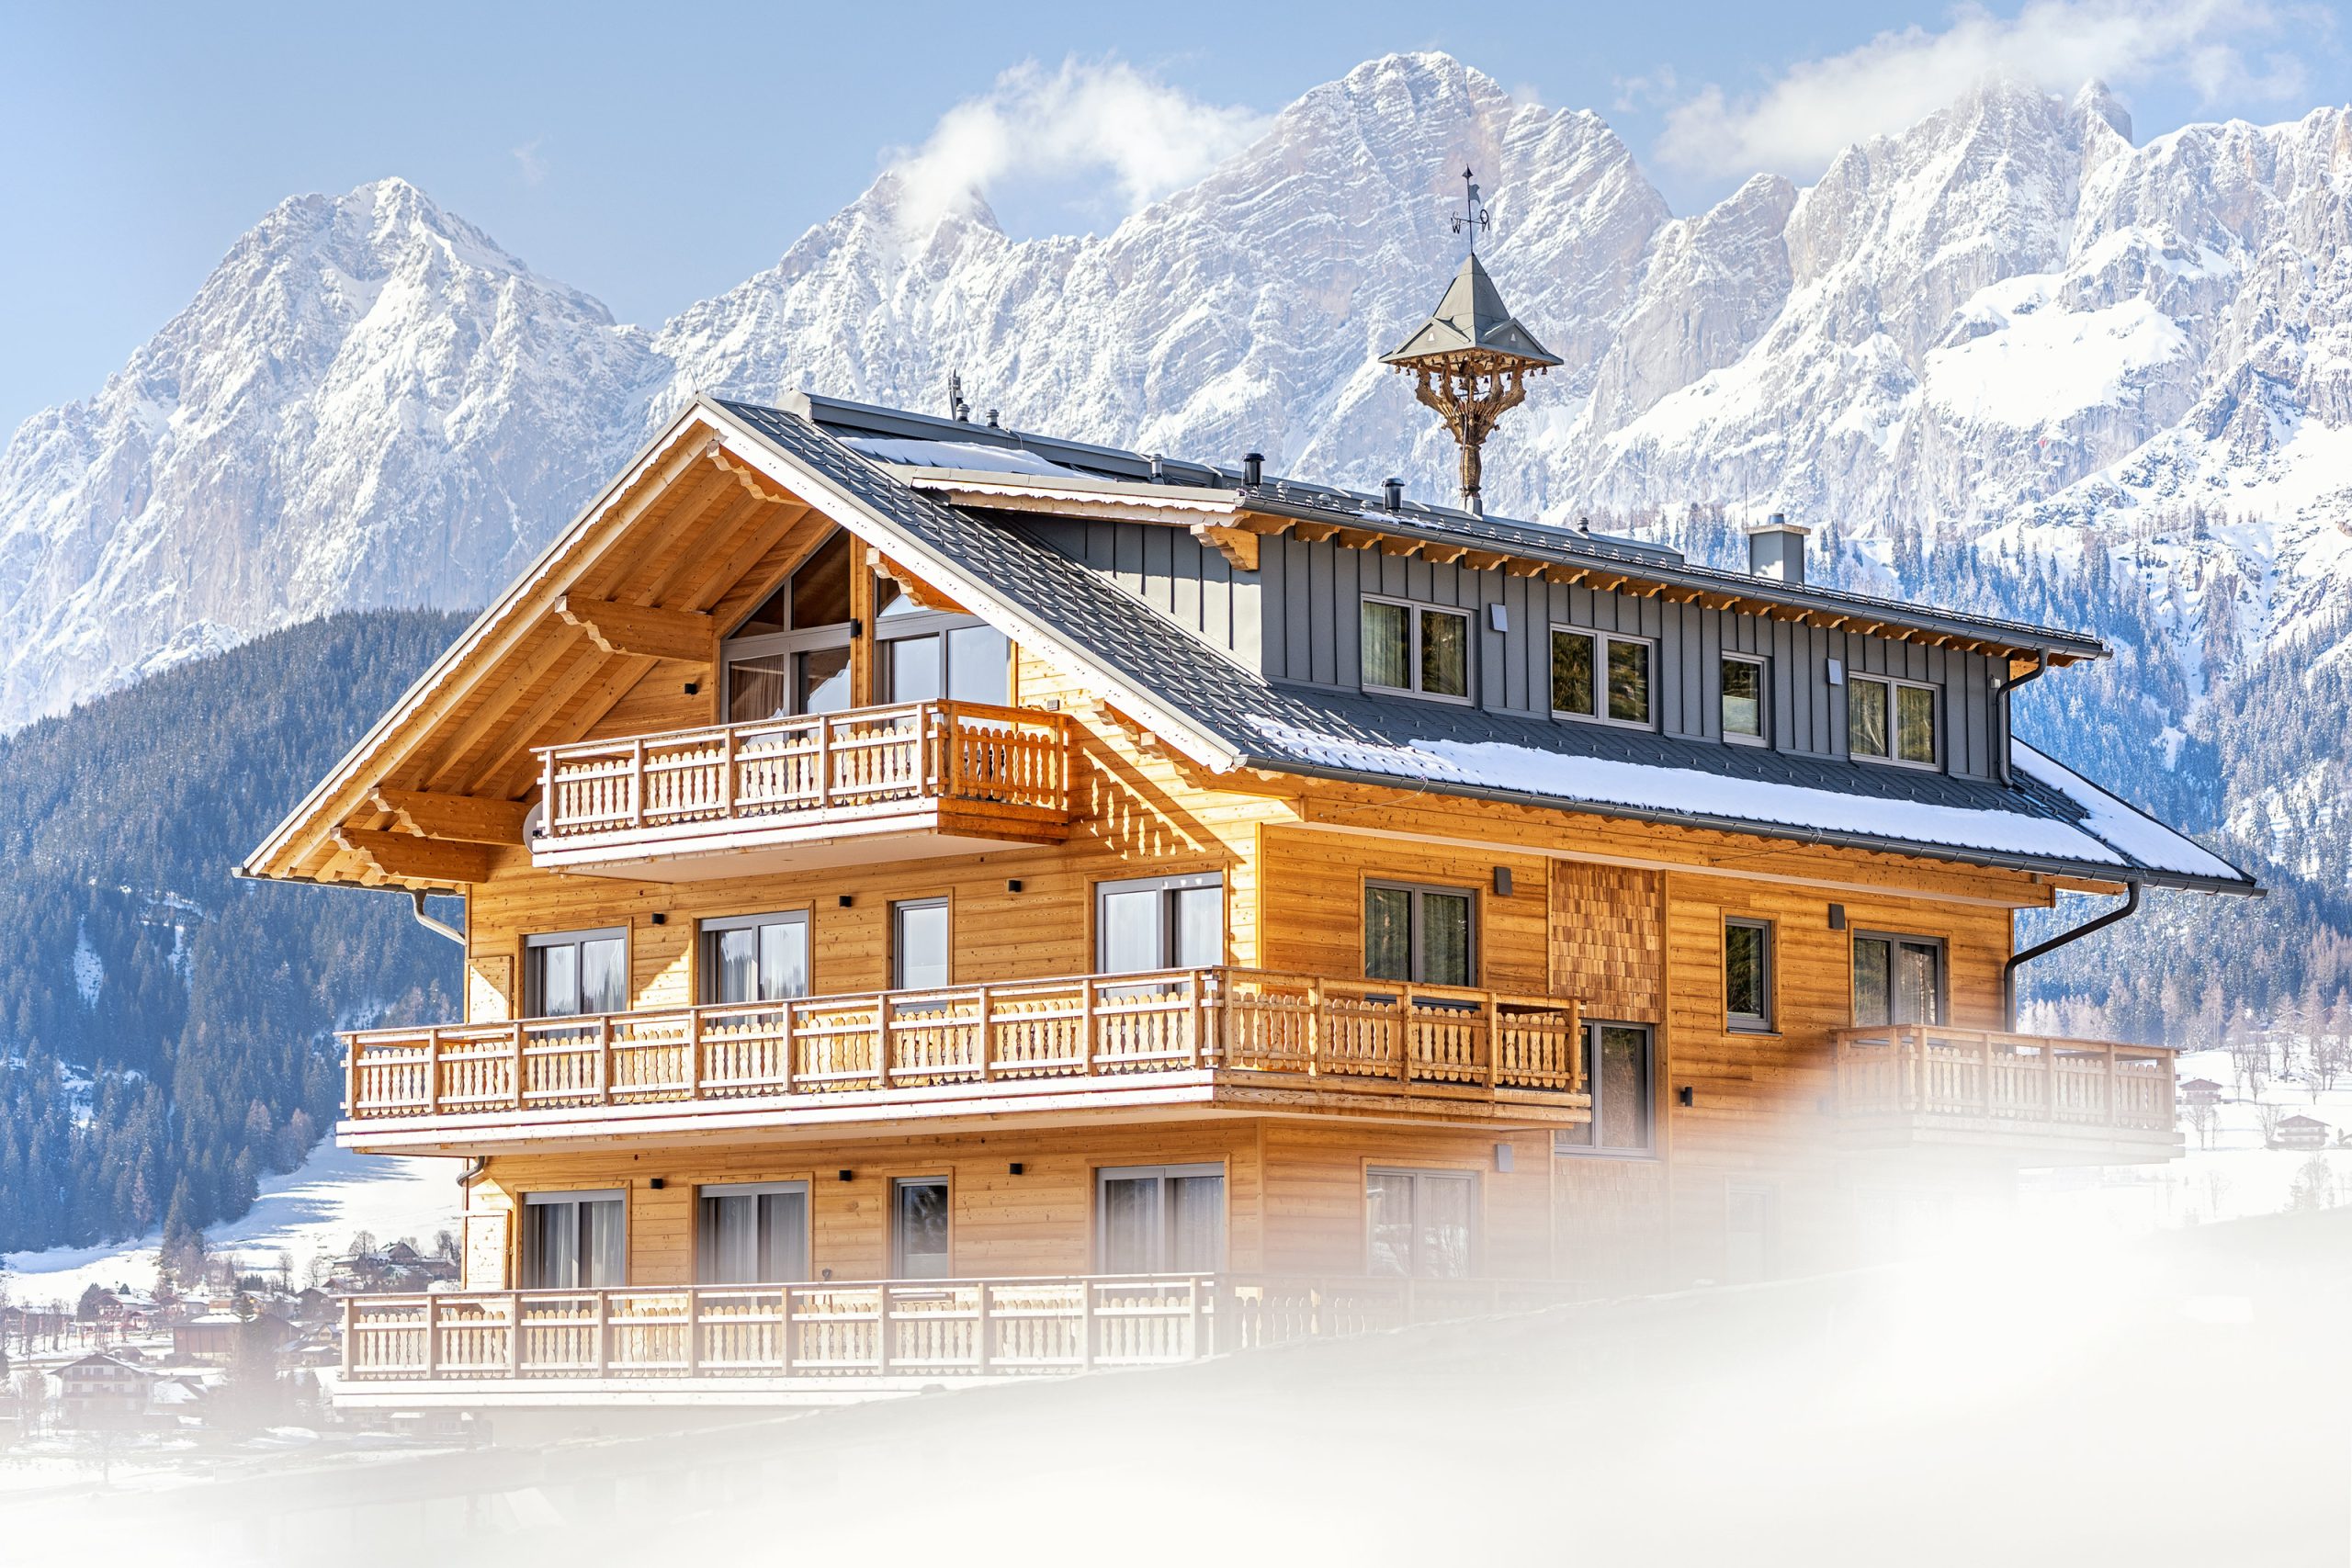 What Attractions Can You Visit Near A Hotel at Dachstein? post thumbnail image